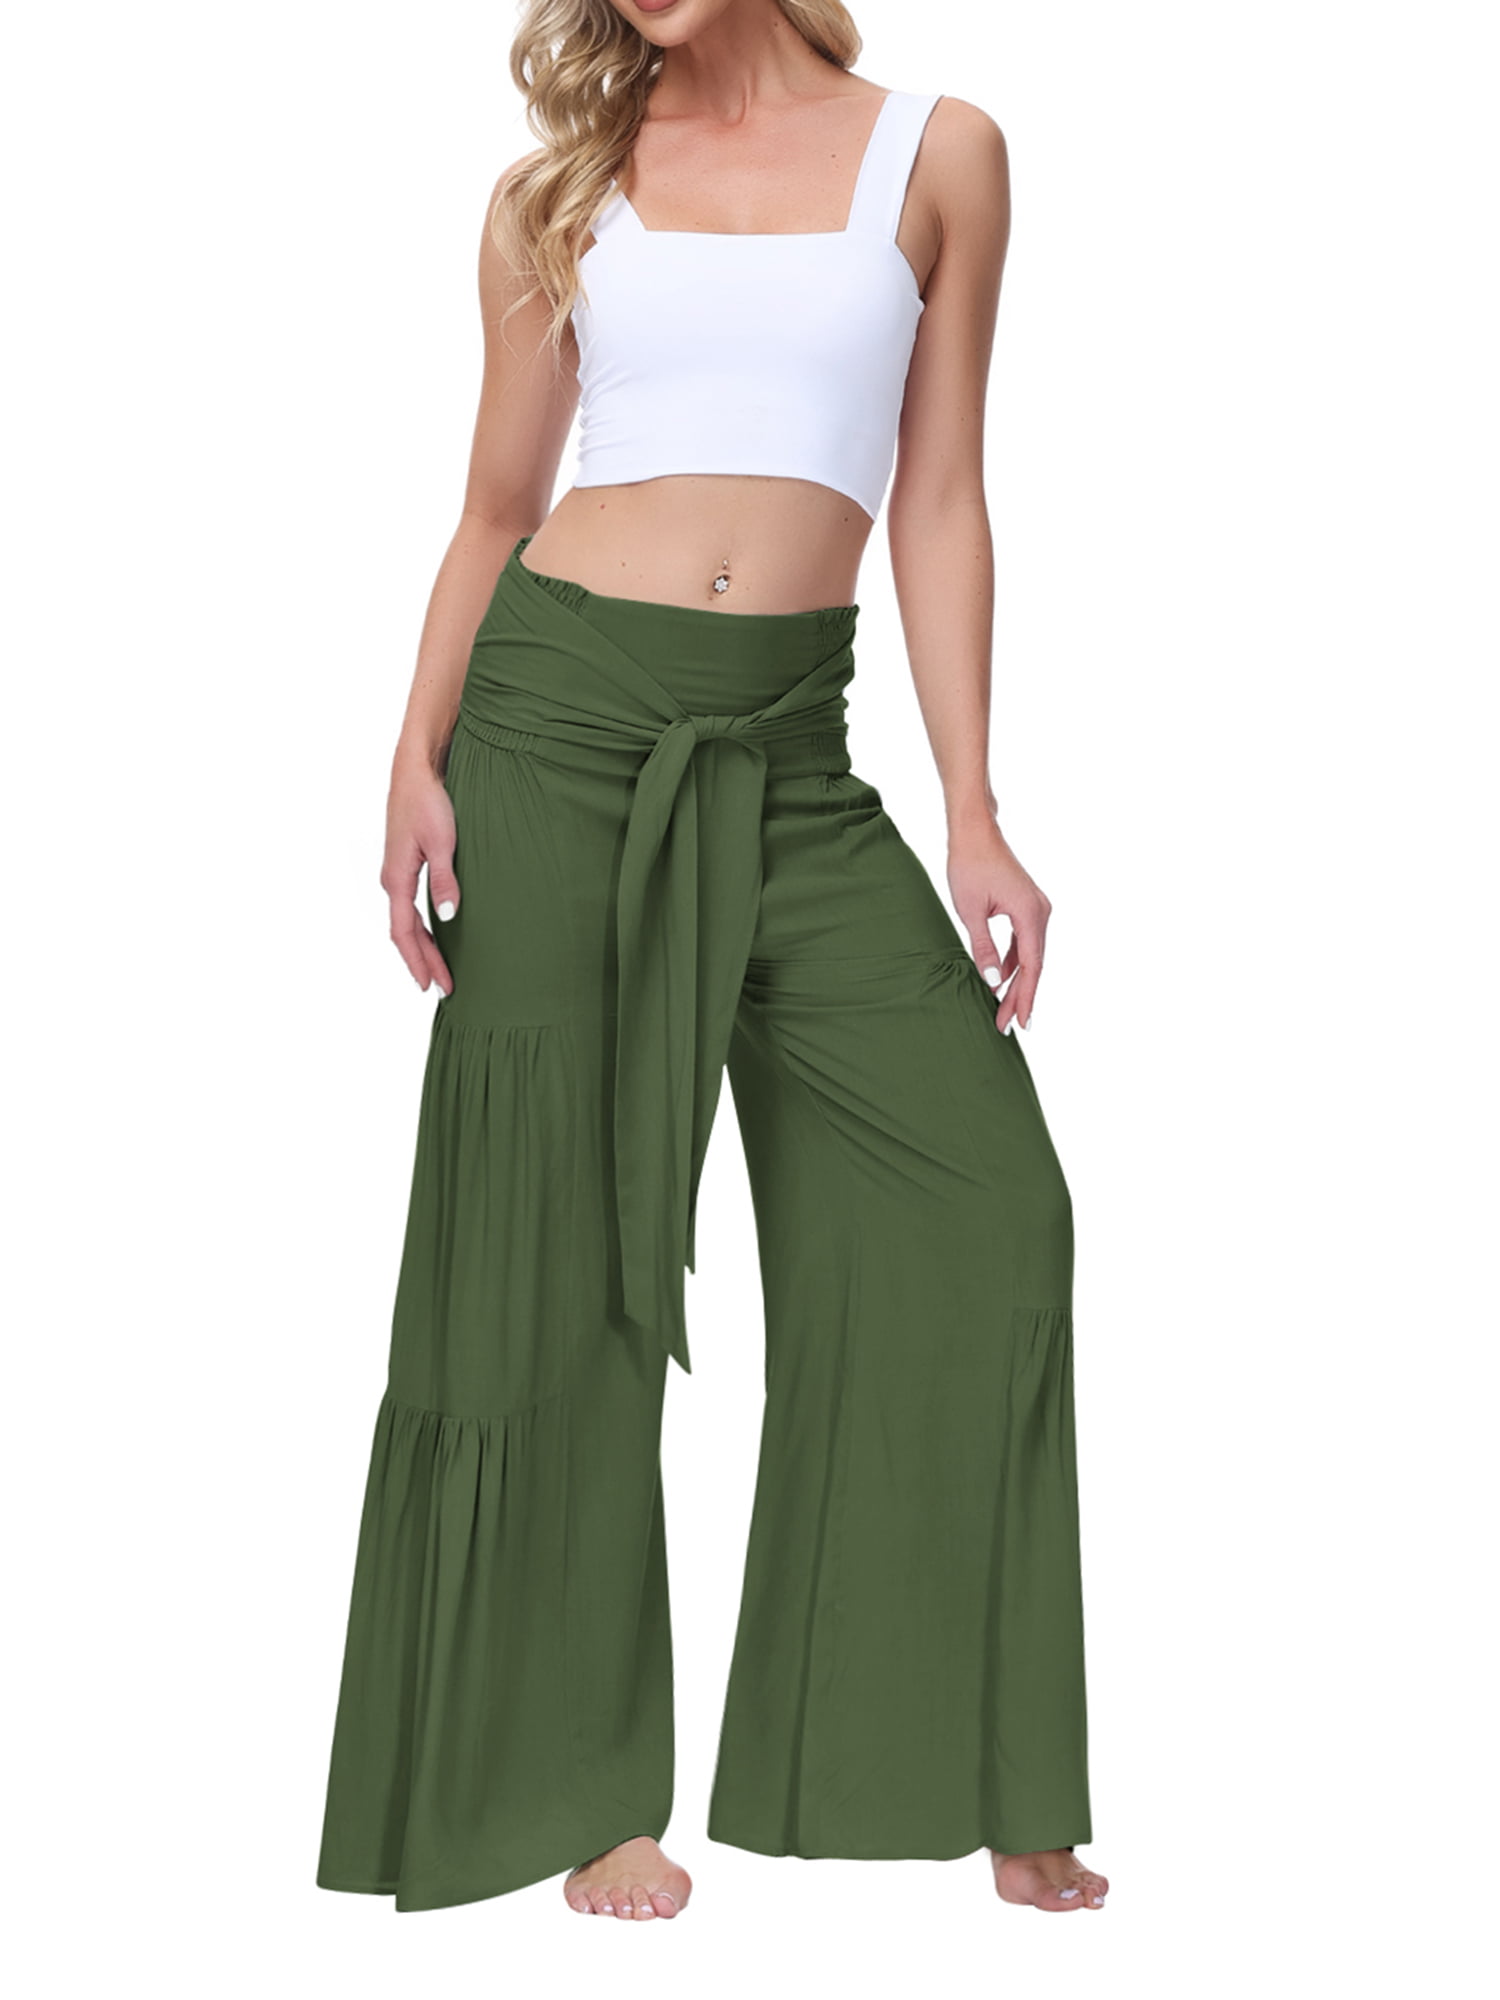 Canrulo Womens Wide Leg Palazzo Pants Loose Ruched High Waist Bandage  Elastic Waist Casual Trousers Dark Green L 